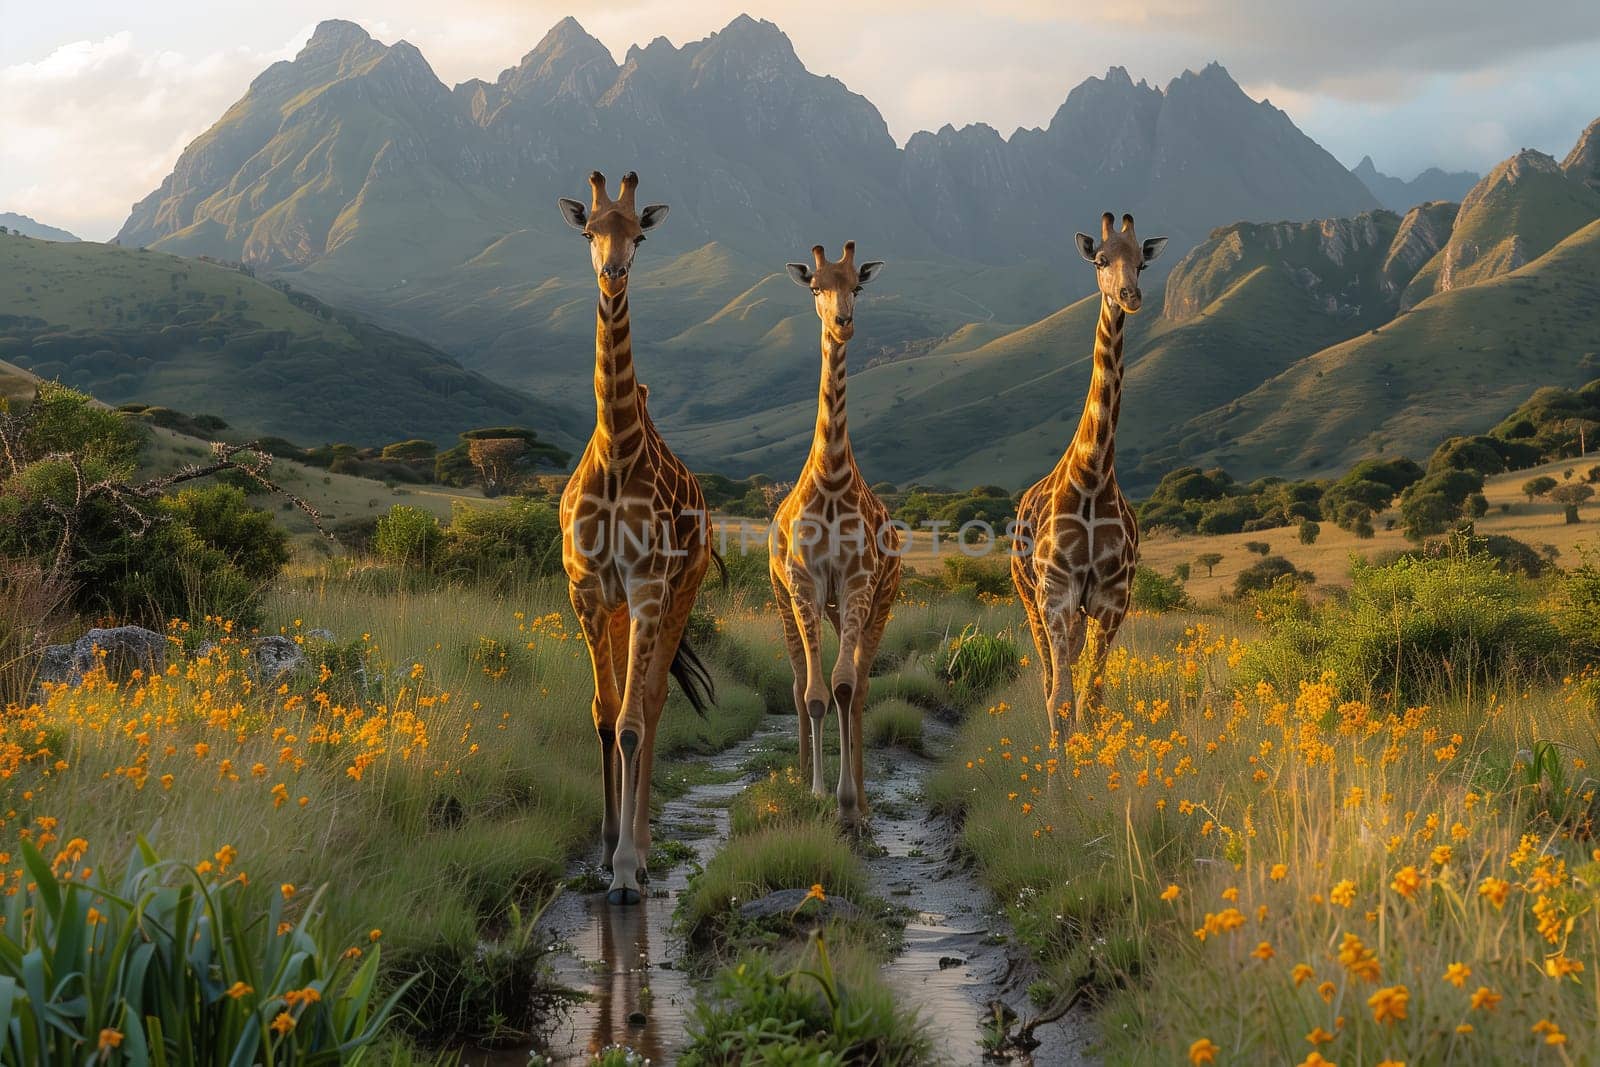 Three giraffes stand tall in field with mountains in background by richwolf